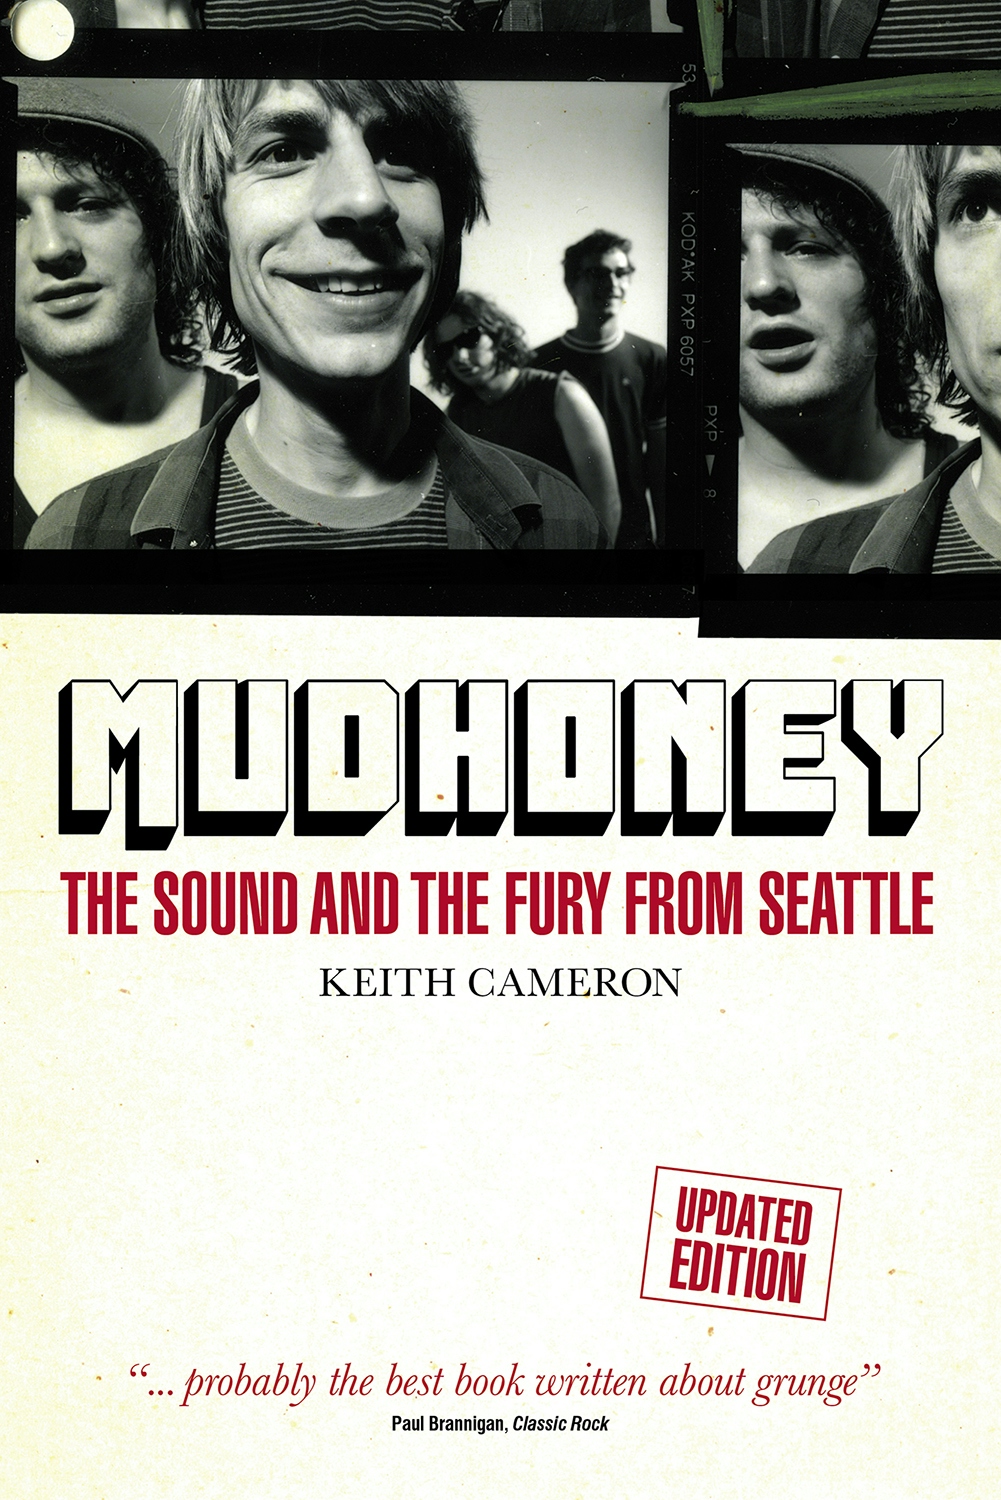 Album artwork for Album artwork for Mudhoney: The Sound and the Fury from Seattle (Updated Edition) by Keith Cameron by Mudhoney: The Sound and the Fury from Seattle (Updated Edition) - Keith Cameron